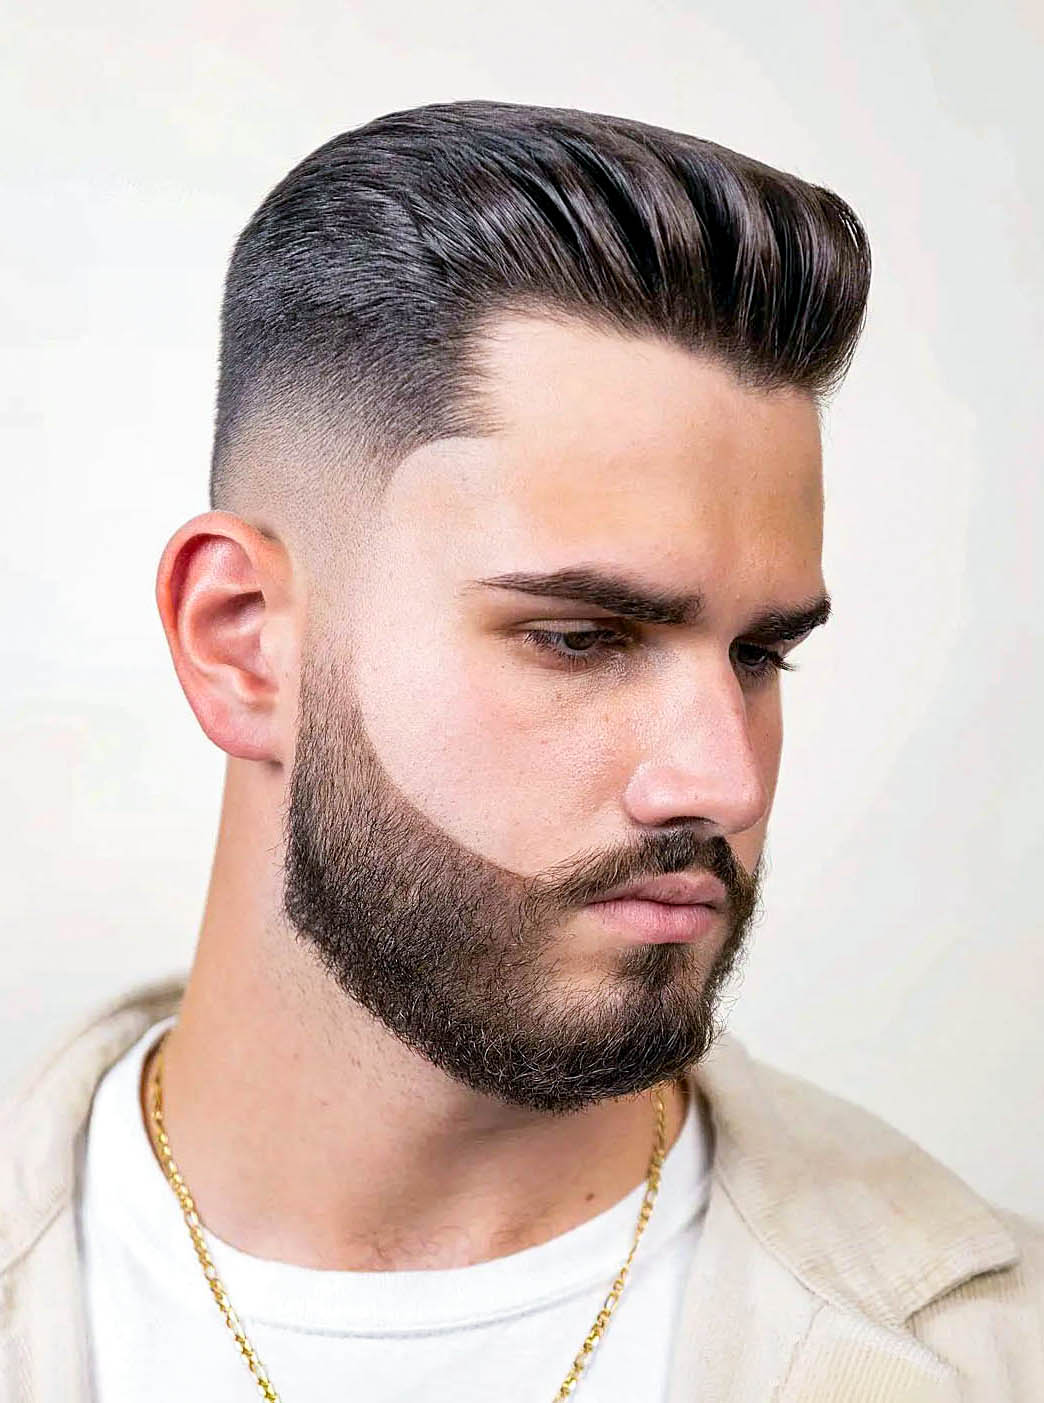 Skin Fade with Neat Quiff